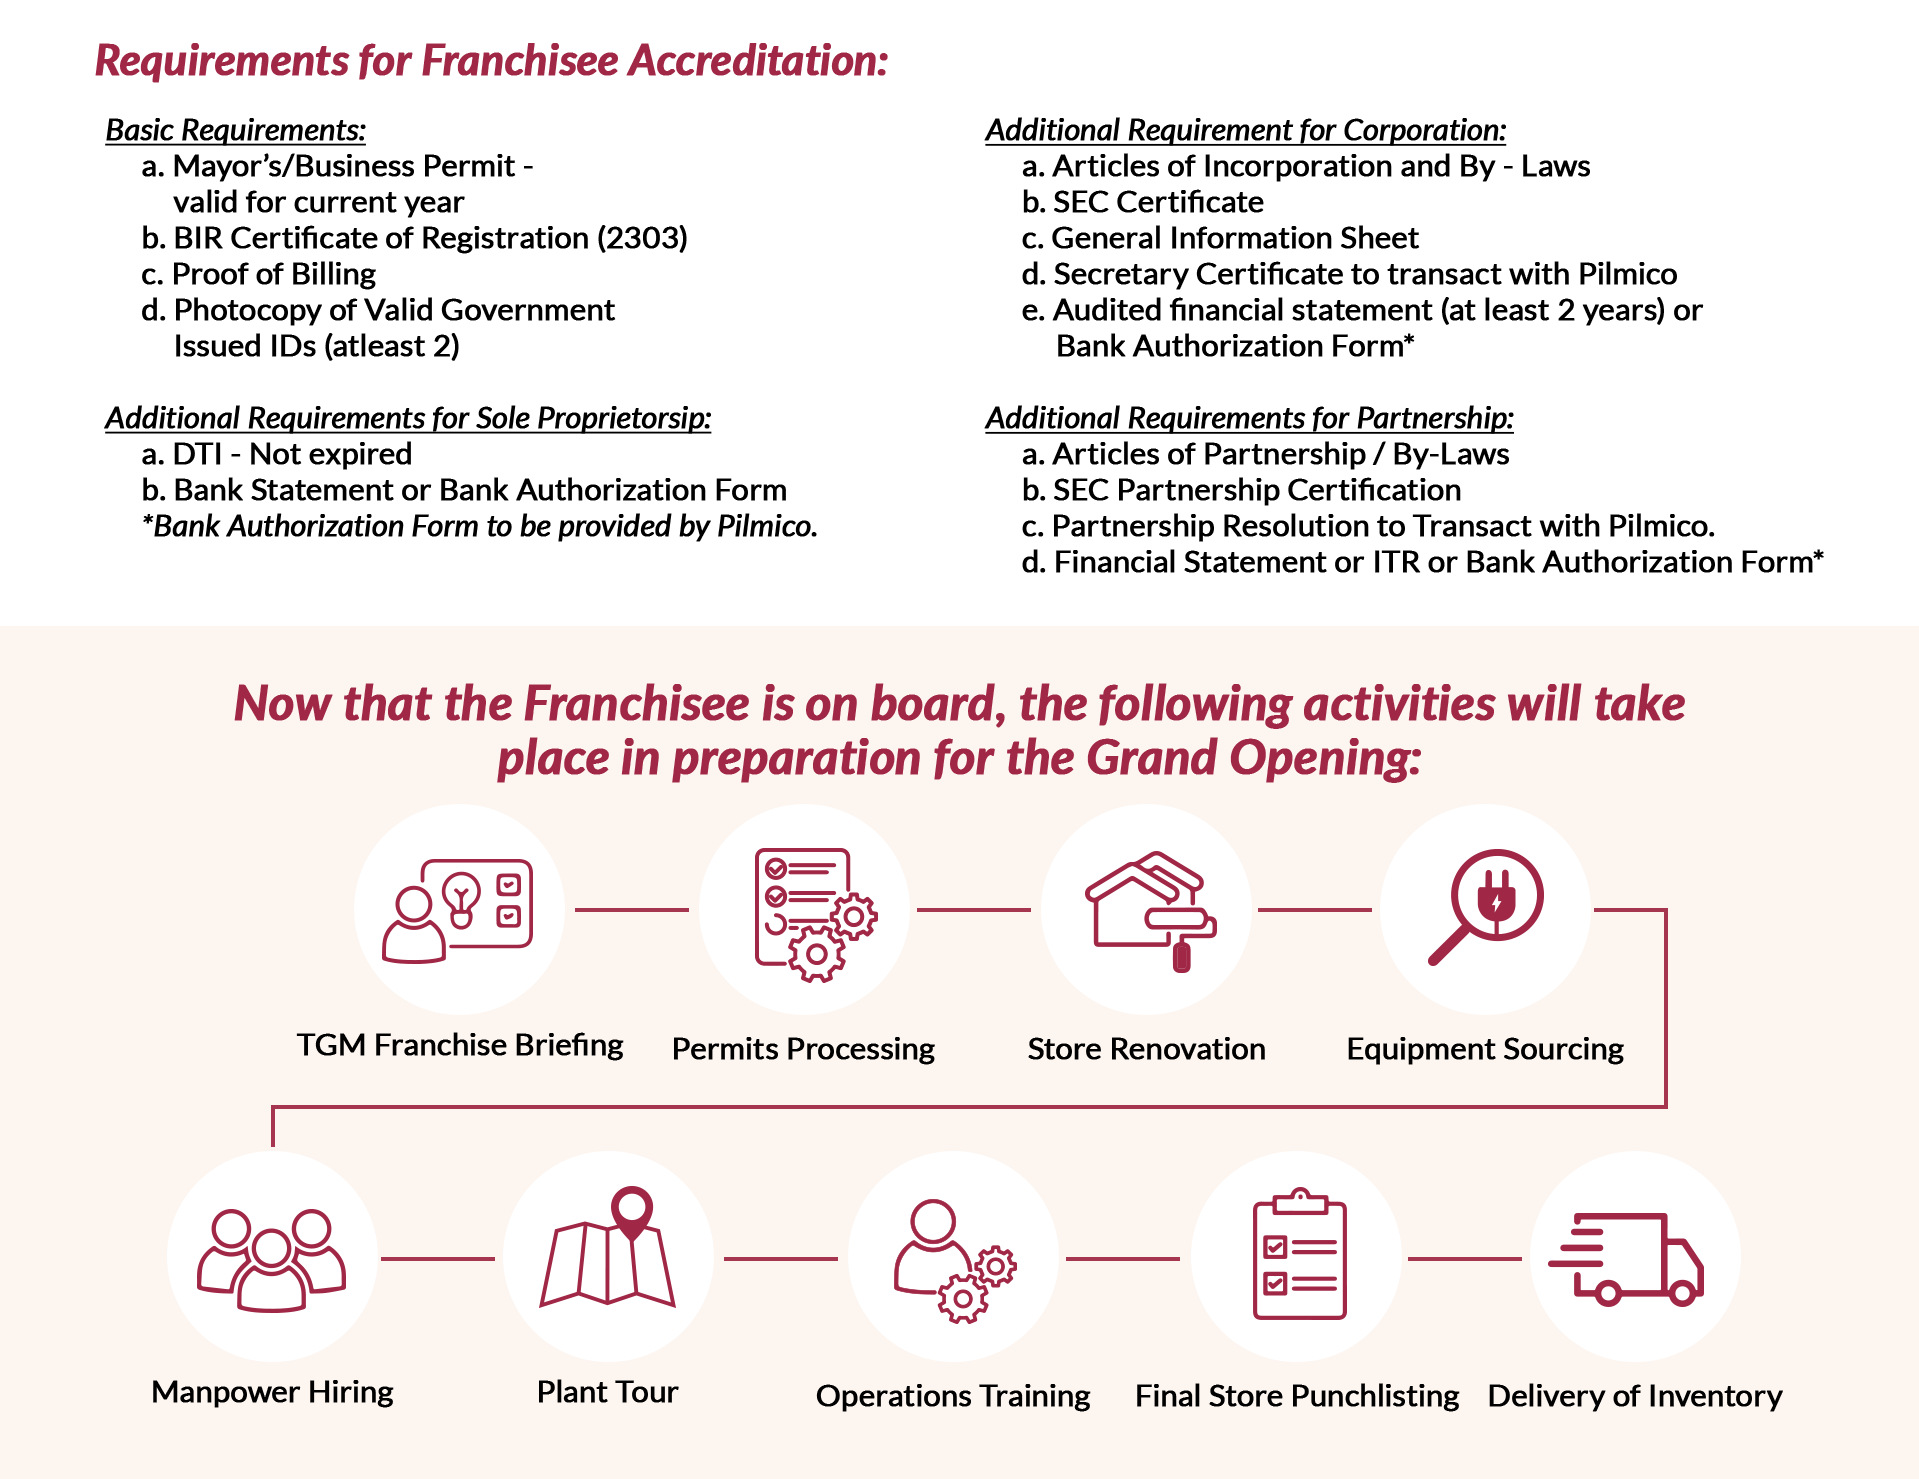 Requirements for The Good Meat Franchise Accreditation and the activities for the Grand Opening